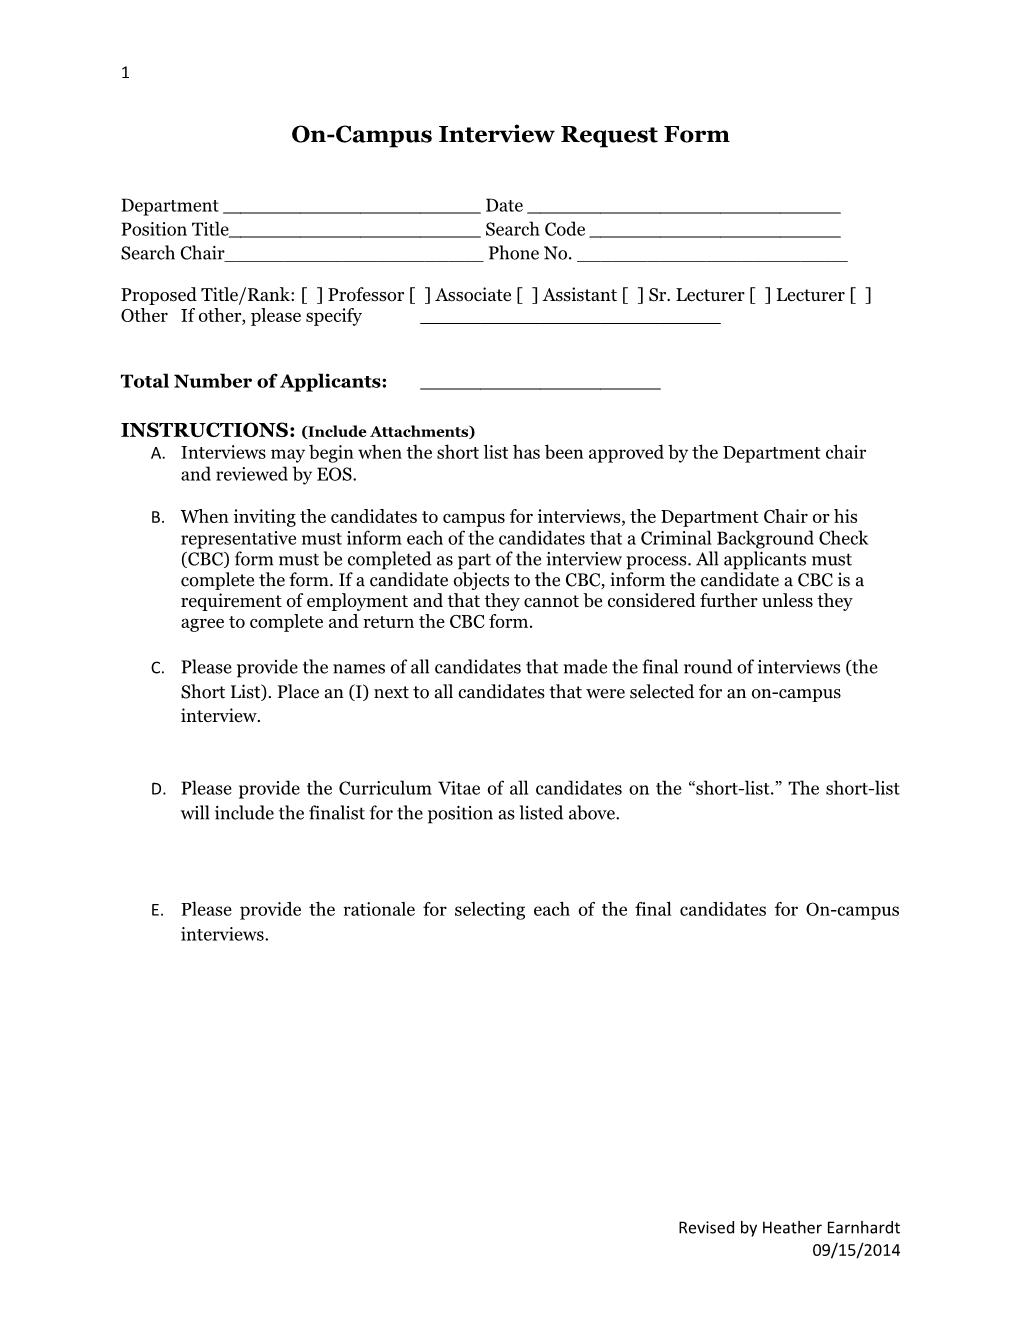 On-Campus Interview Request Form